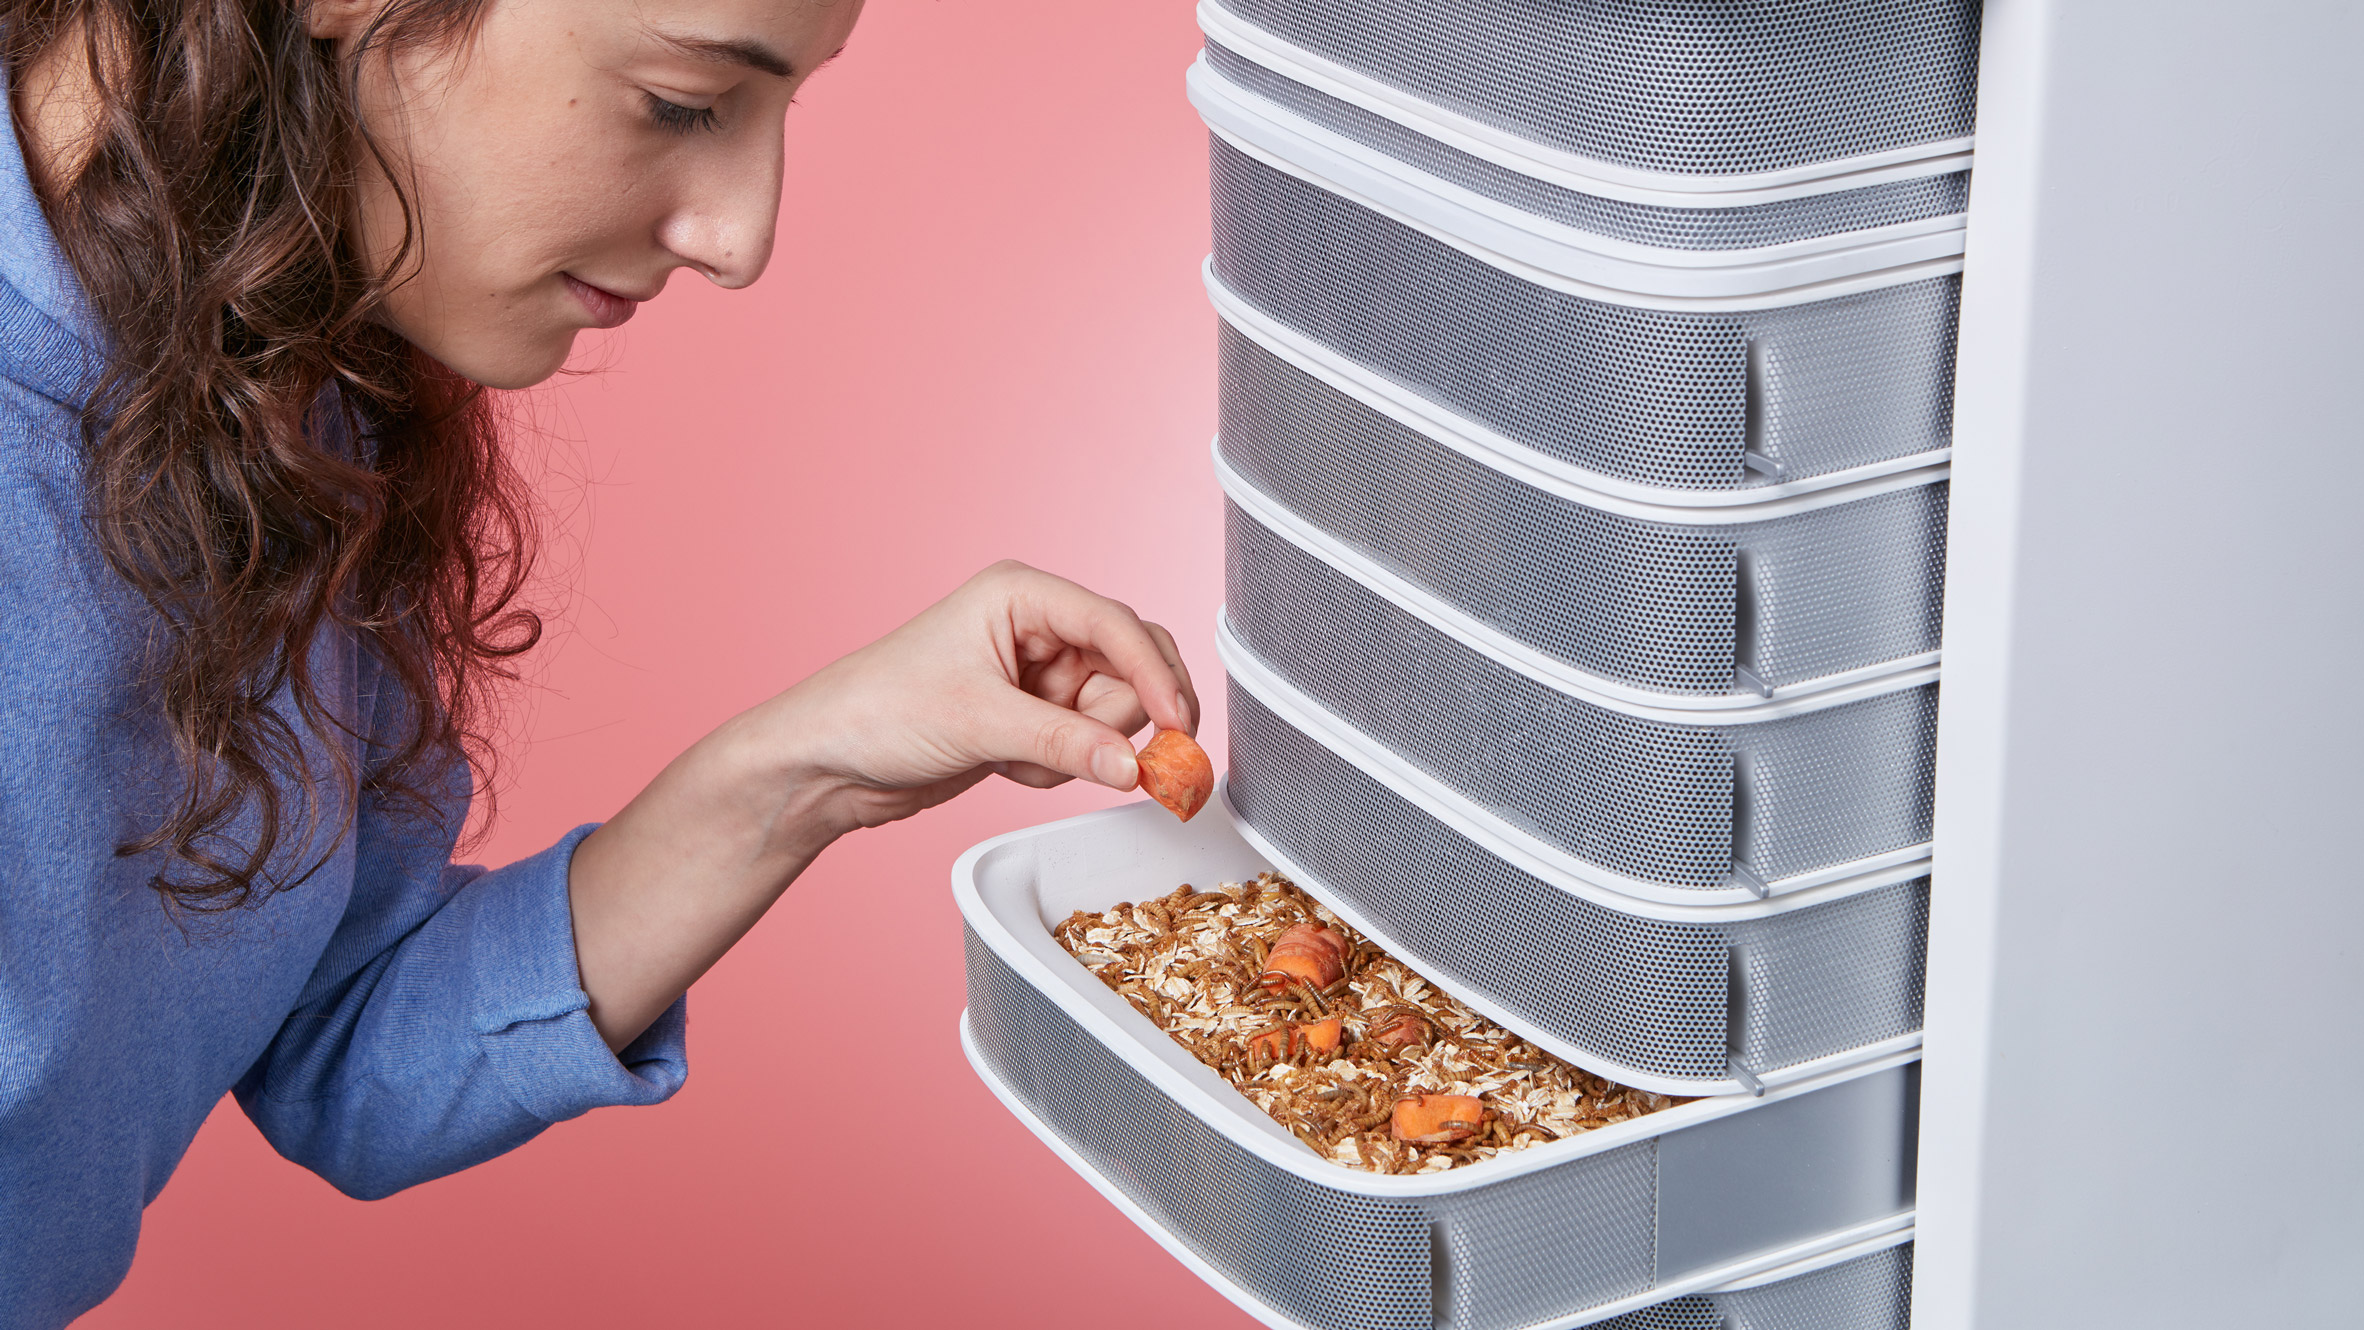 Livin Farms' bench-top insect farms are intended to make mealworms part of our everyday diet